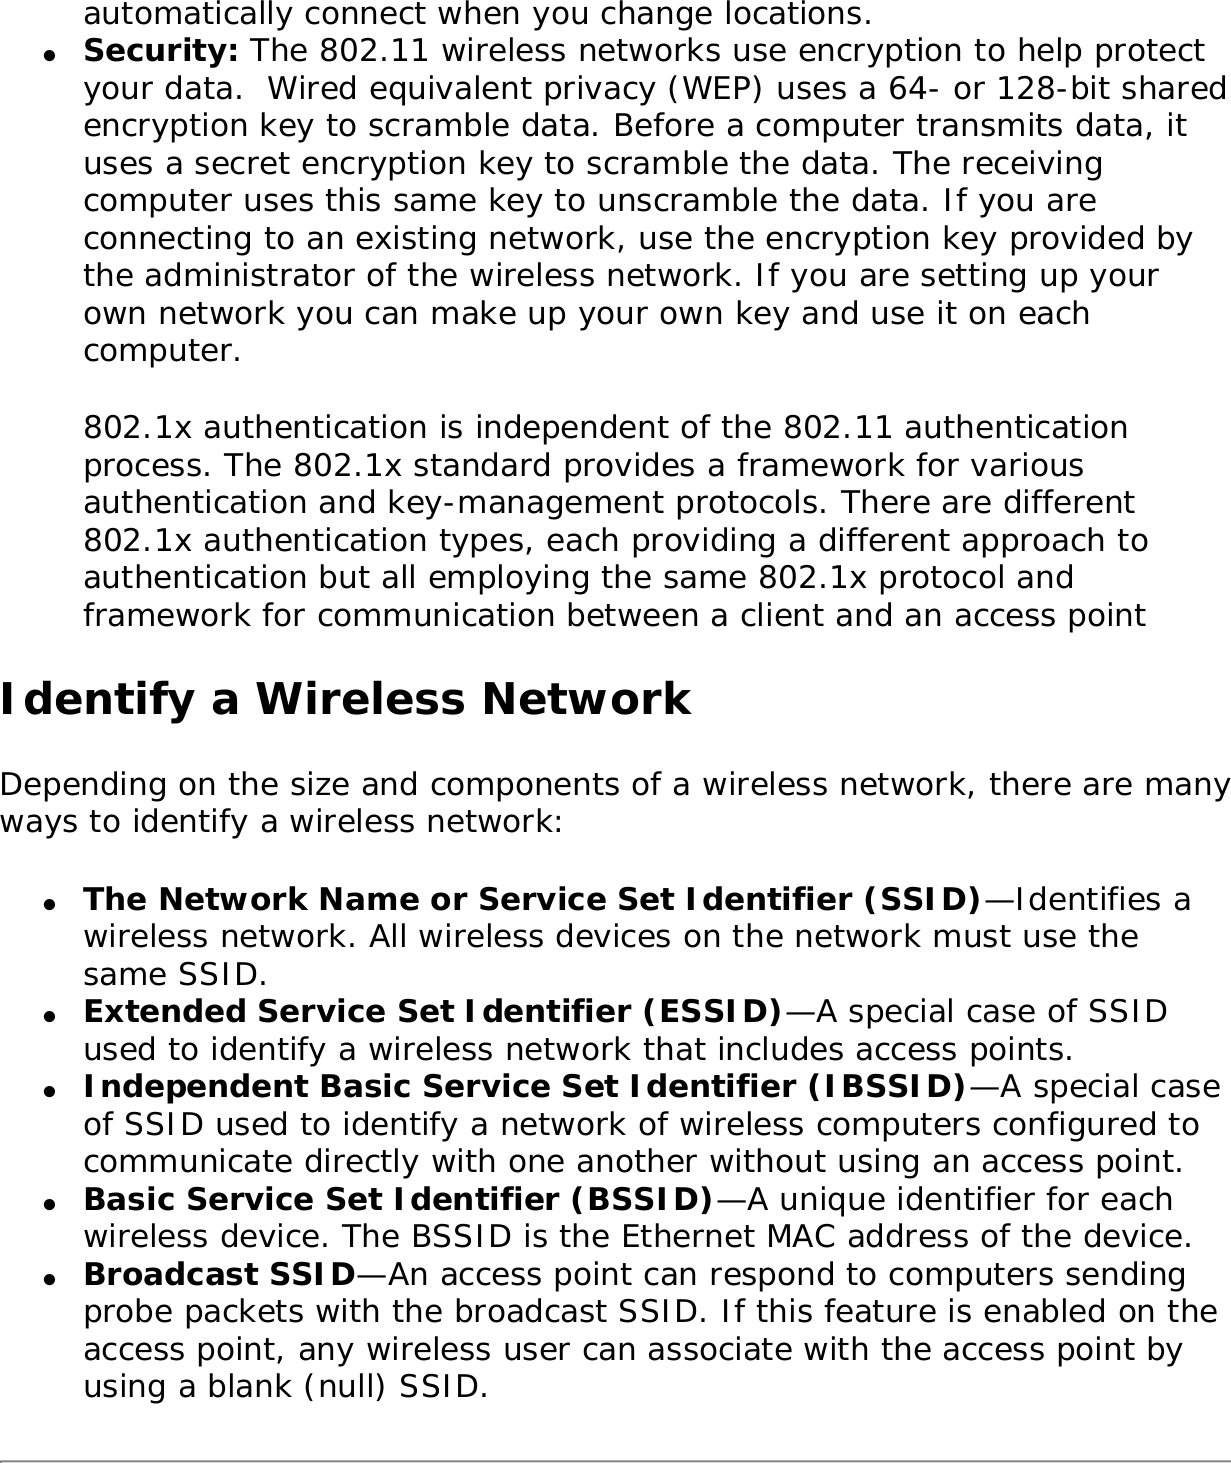 automatically connect when you change locations.●     Security: The 802.11 wireless networks use encryption to help protect your data.  Wired equivalent privacy (WEP) uses a 64- or 128-bit shared encryption key to scramble data. Before a computer transmits data, it uses a secret encryption key to scramble the data. The receiving computer uses this same key to unscramble the data. If you are connecting to an existing network, use the encryption key provided by the administrator of the wireless network. If you are setting up your own network you can make up your own key and use it on each computer. 802.1x authentication is independent of the 802.11 authentication process. The 802.1x standard provides a framework for various authentication and key-management protocols. There are different 802.1x authentication types, each providing a different approach to authentication but all employing the same 802.1x protocol and framework for communication between a client and an access point Identify a Wireless NetworkDepending on the size and components of a wireless network, there are many ways to identify a wireless network: ●     The Network Name or Service Set Identifier (SSID)—Identifies a wireless network. All wireless devices on the network must use the same SSID. ●     Extended Service Set Identifier (ESSID)—A special case of SSID used to identify a wireless network that includes access points. ●     Independent Basic Service Set Identifier (IBSSID)—A special case of SSID used to identify a network of wireless computers configured to communicate directly with one another without using an access point. ●     Basic Service Set Identifier (BSSID)—A unique identifier for each wireless device. The BSSID is the Ethernet MAC address of the device. ●     Broadcast SSID—An access point can respond to computers sending probe packets with the broadcast SSID. If this feature is enabled on the access point, any wireless user can associate with the access point by using a blank (null) SSID.